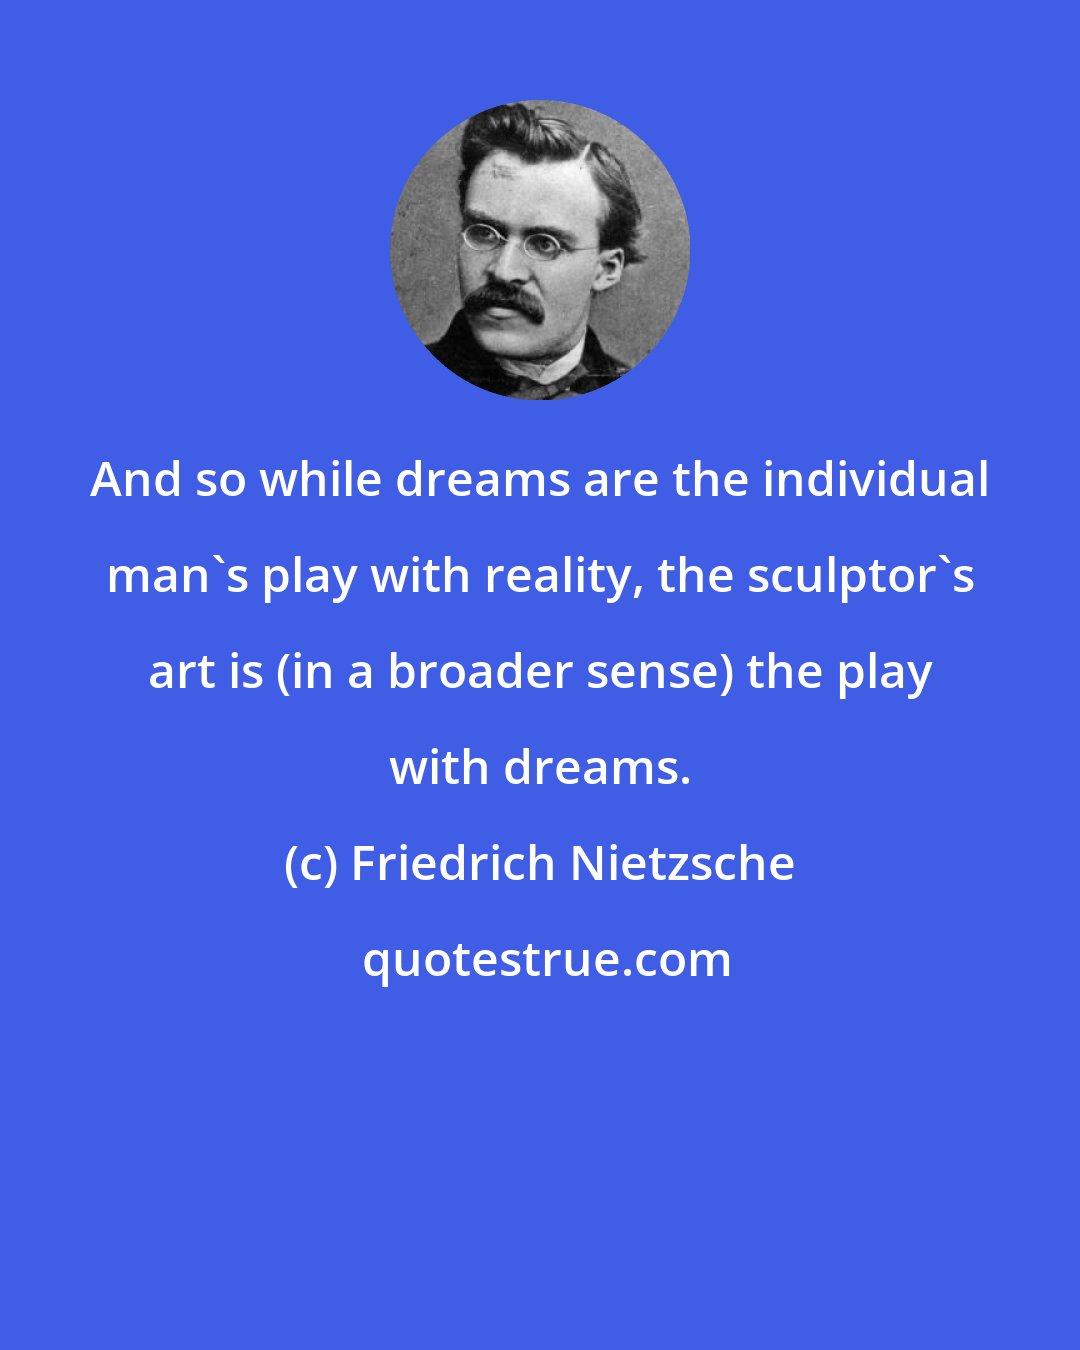 Friedrich Nietzsche: And so while dreams are the individual man's play with reality, the sculptor's art is (in a broader sense) the play with dreams.